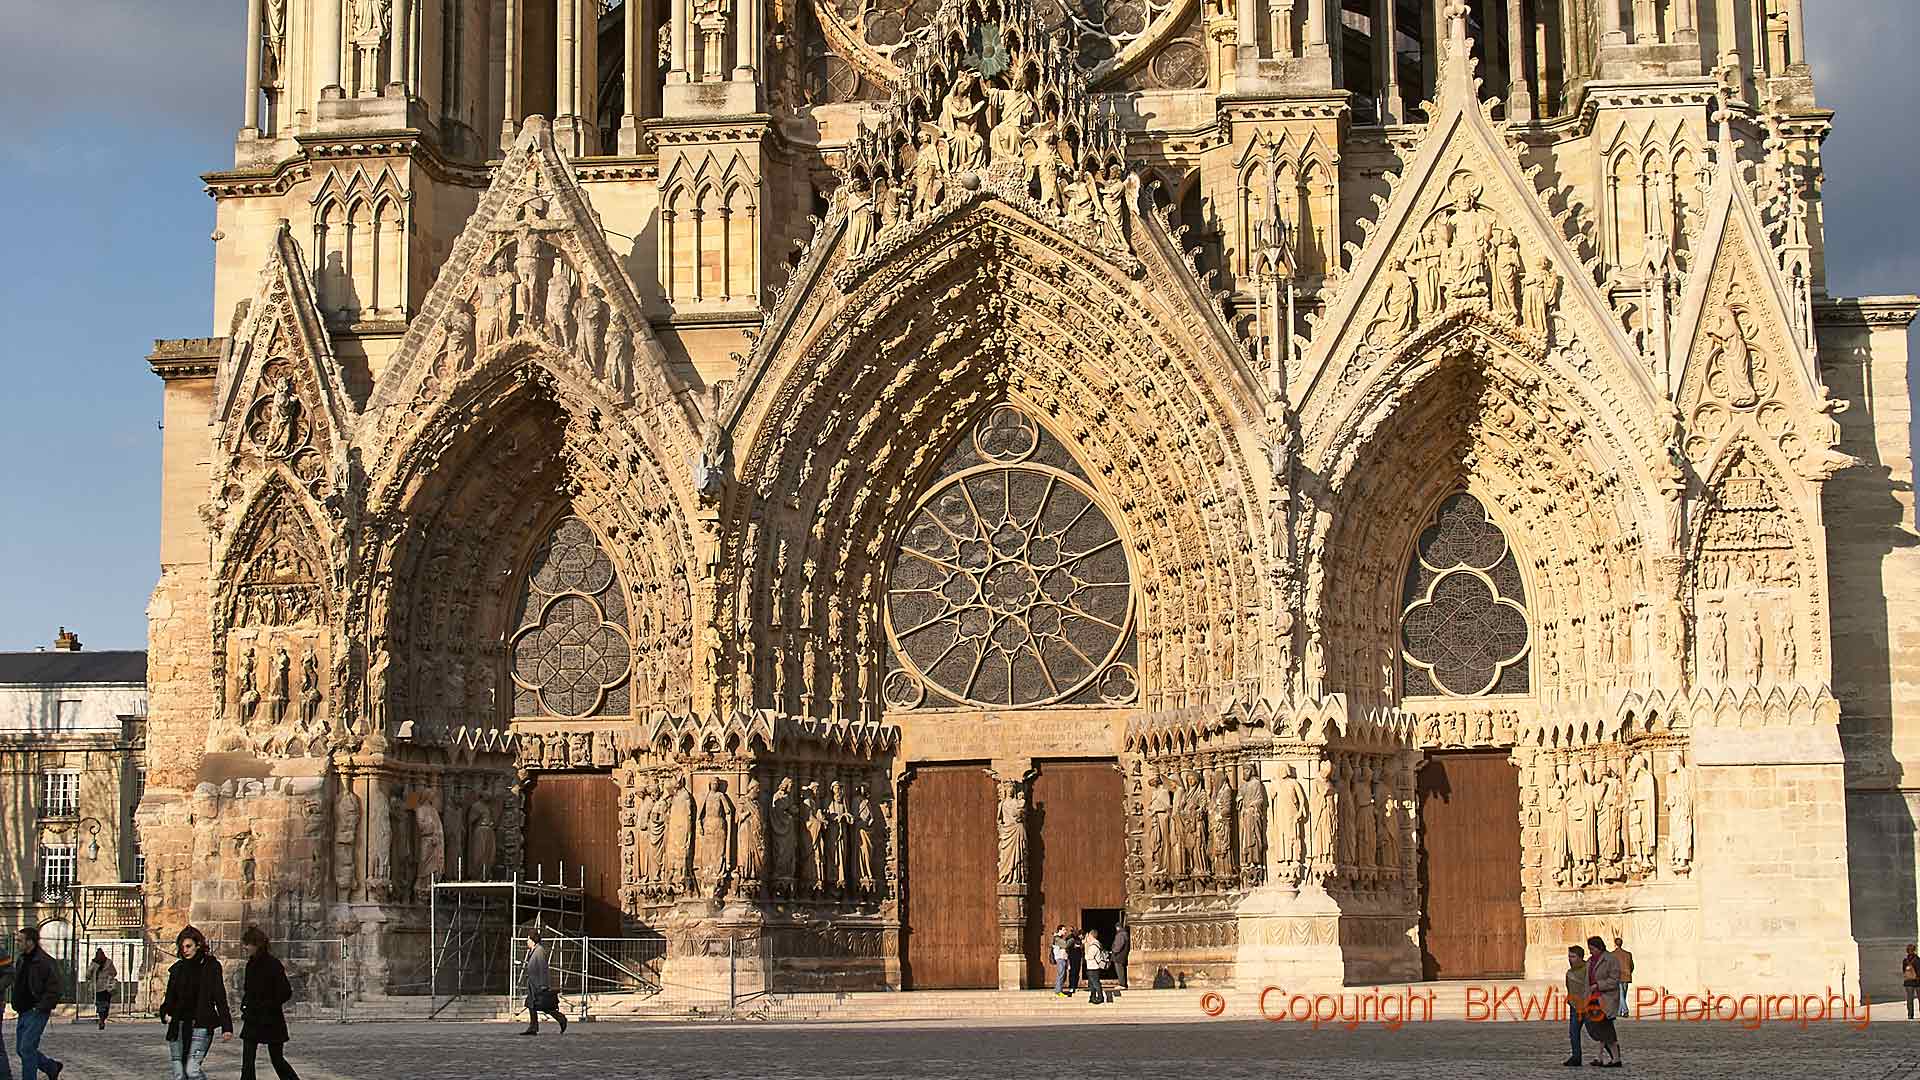 City Guide: Champagne & Reims